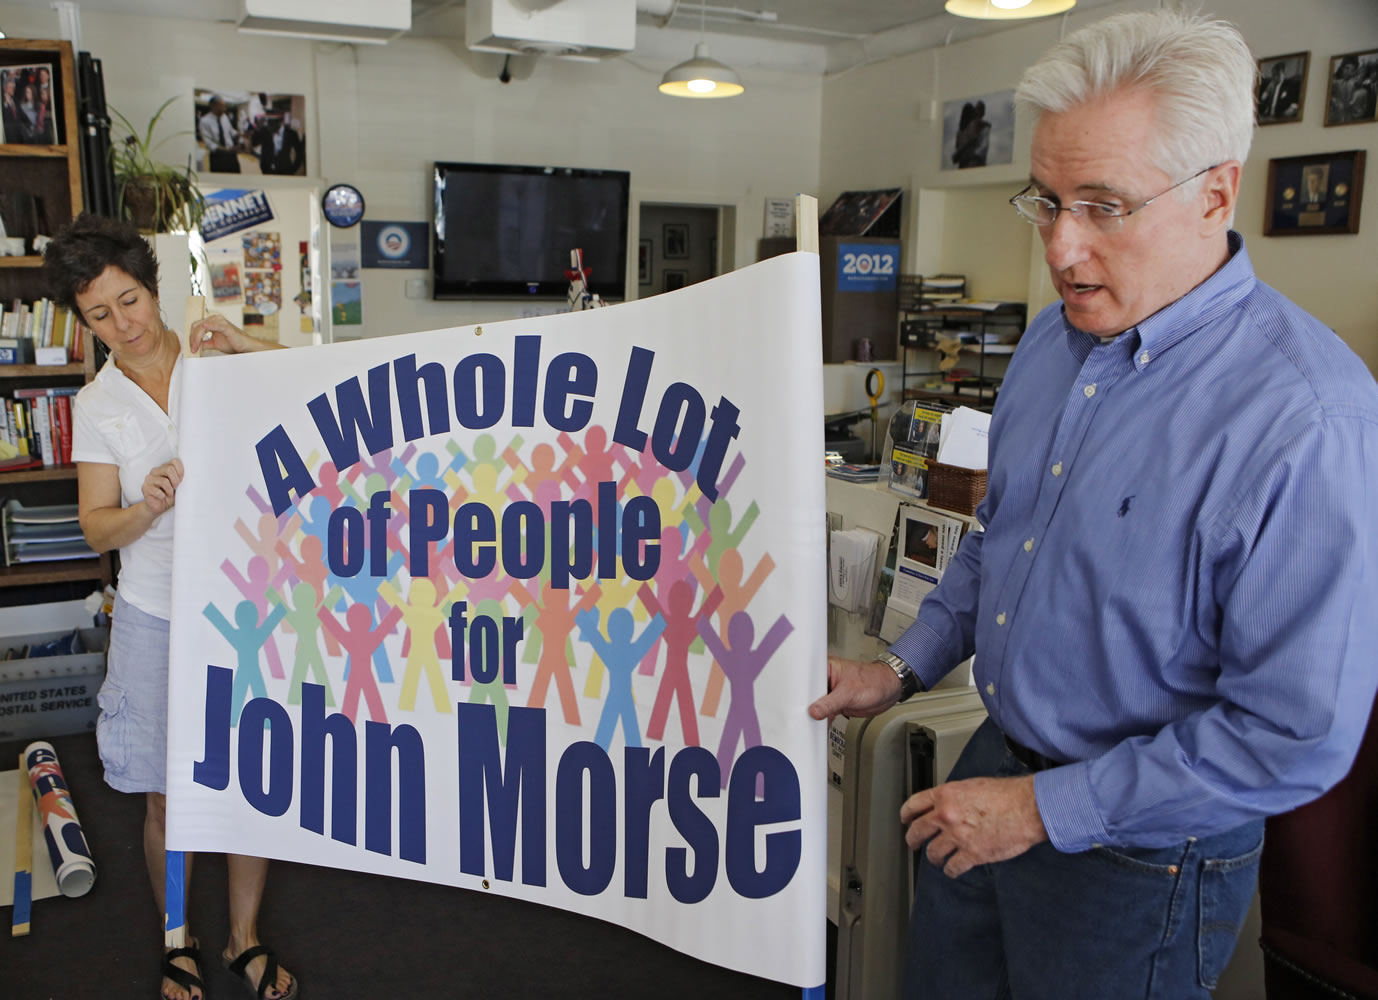 Democratic state Senate President John Morse, right, and Cristy Le Lait roll out a banner at the Democratic Party offices in Colorado Springs, Colo., that they plan to use to urge voters not to sign petitions for Morse's recall.